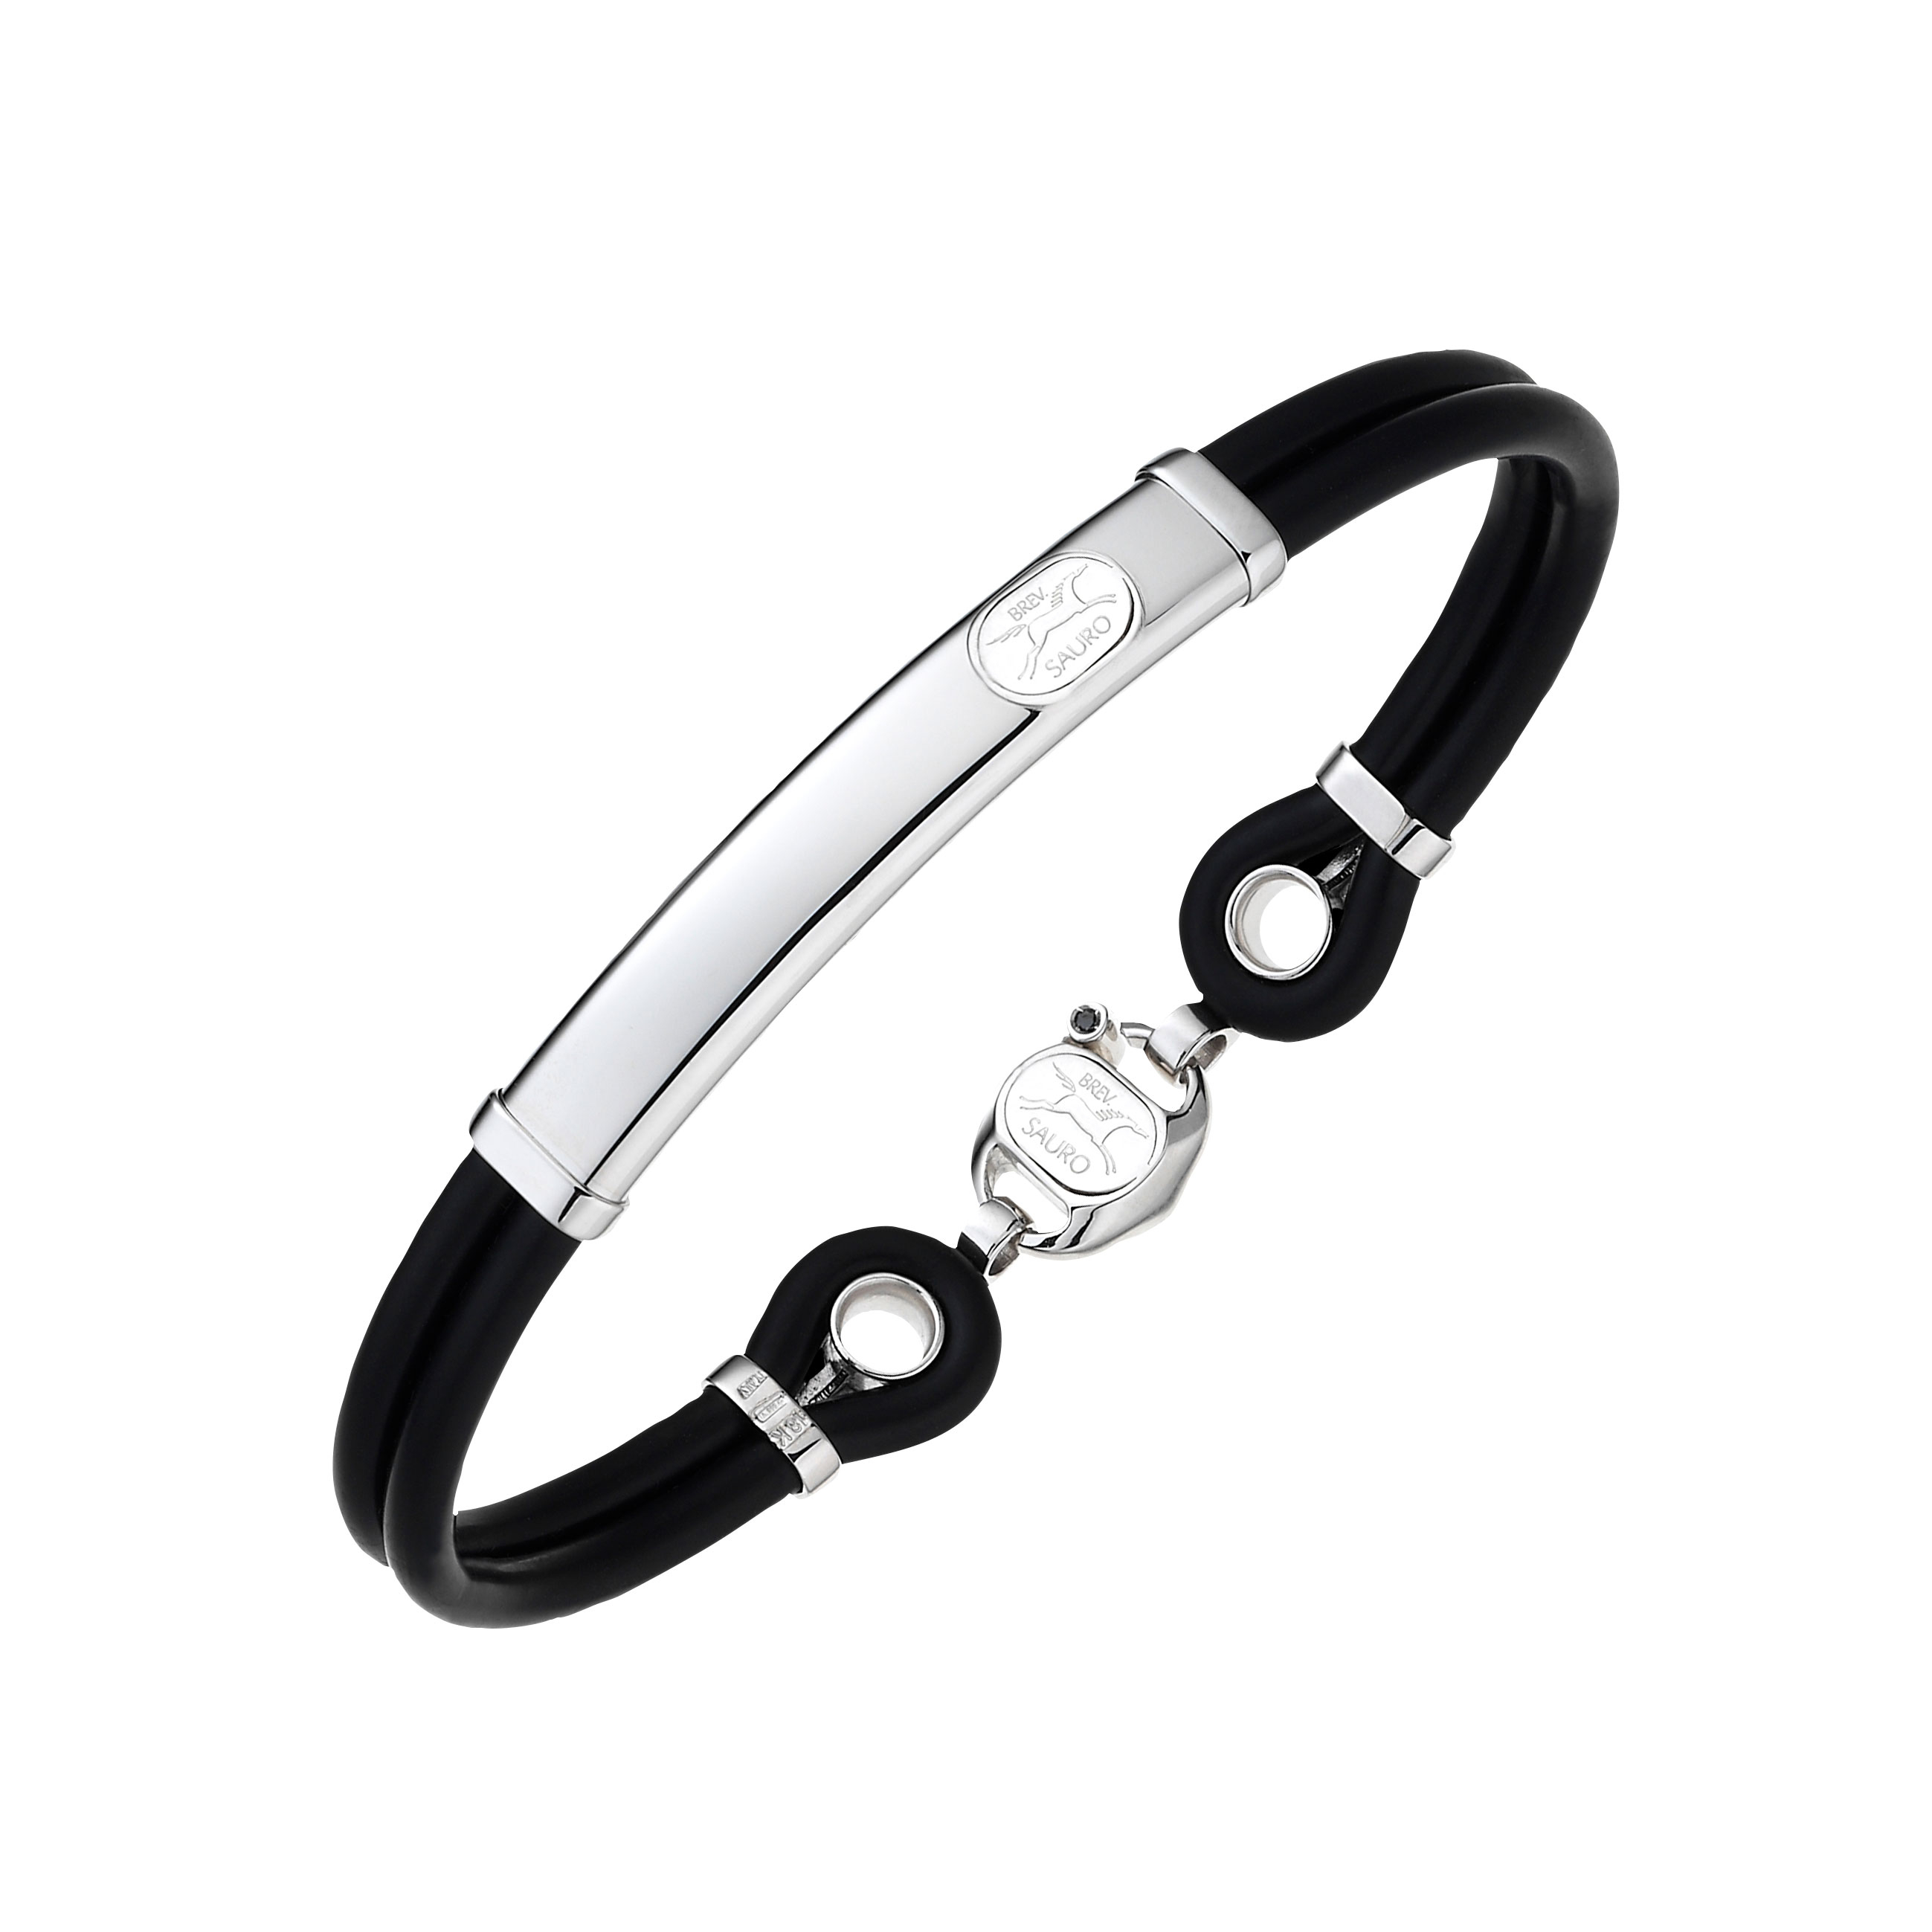 Ormentera Stainless Steel Bracelet Price in India - Buy Ormentera Stainless  Steel Bracelet Online at Best Prices in India